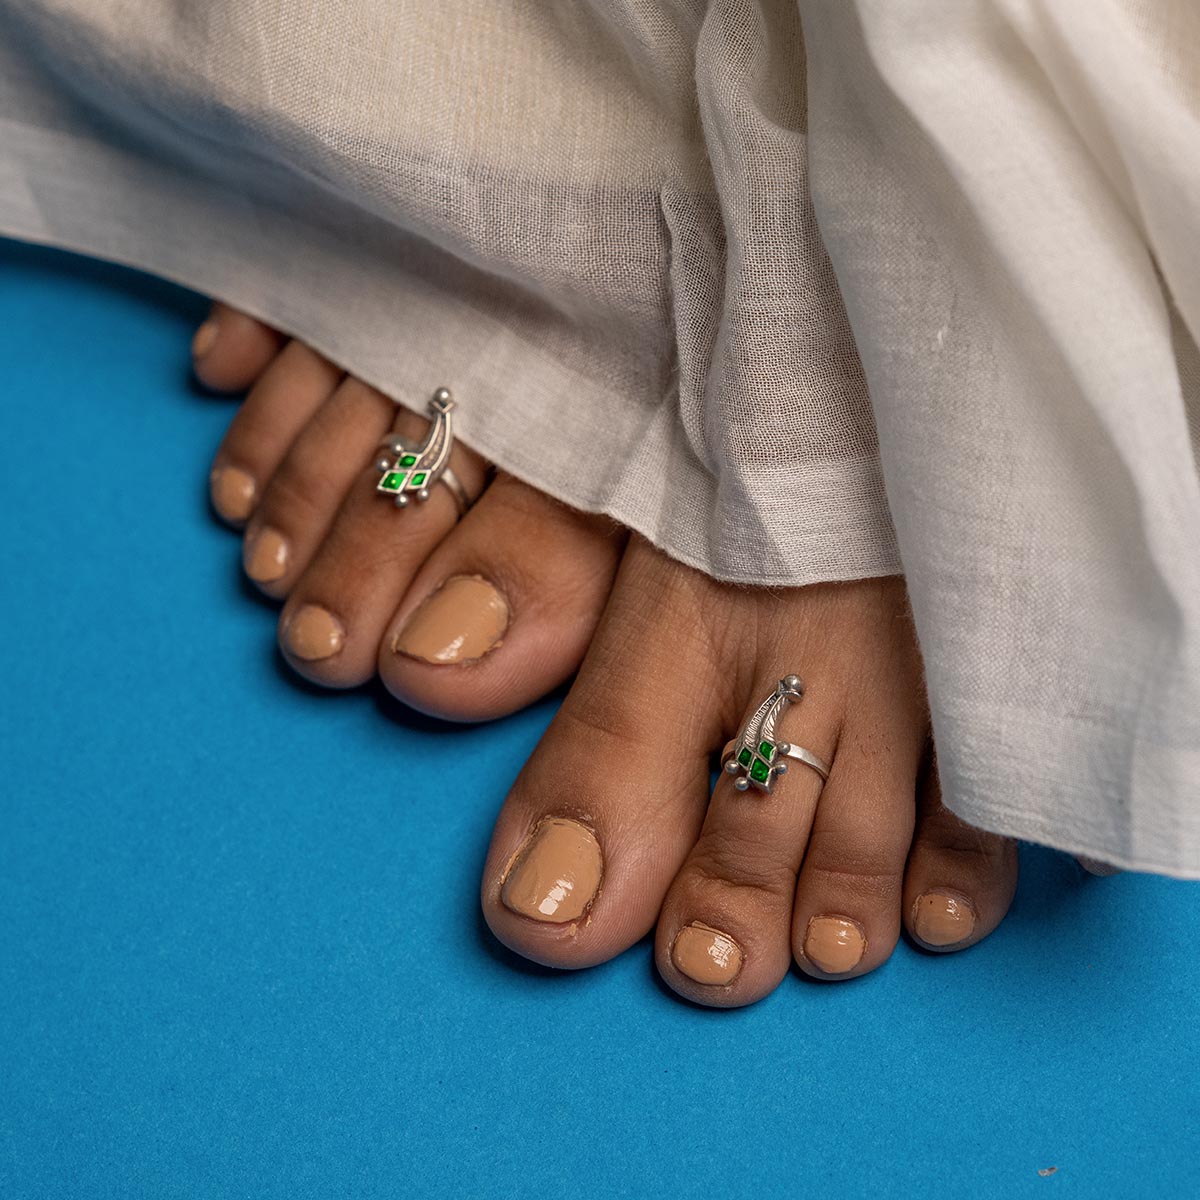 Anklets: Here's how to wear them and their meanings | Pulse Ghana